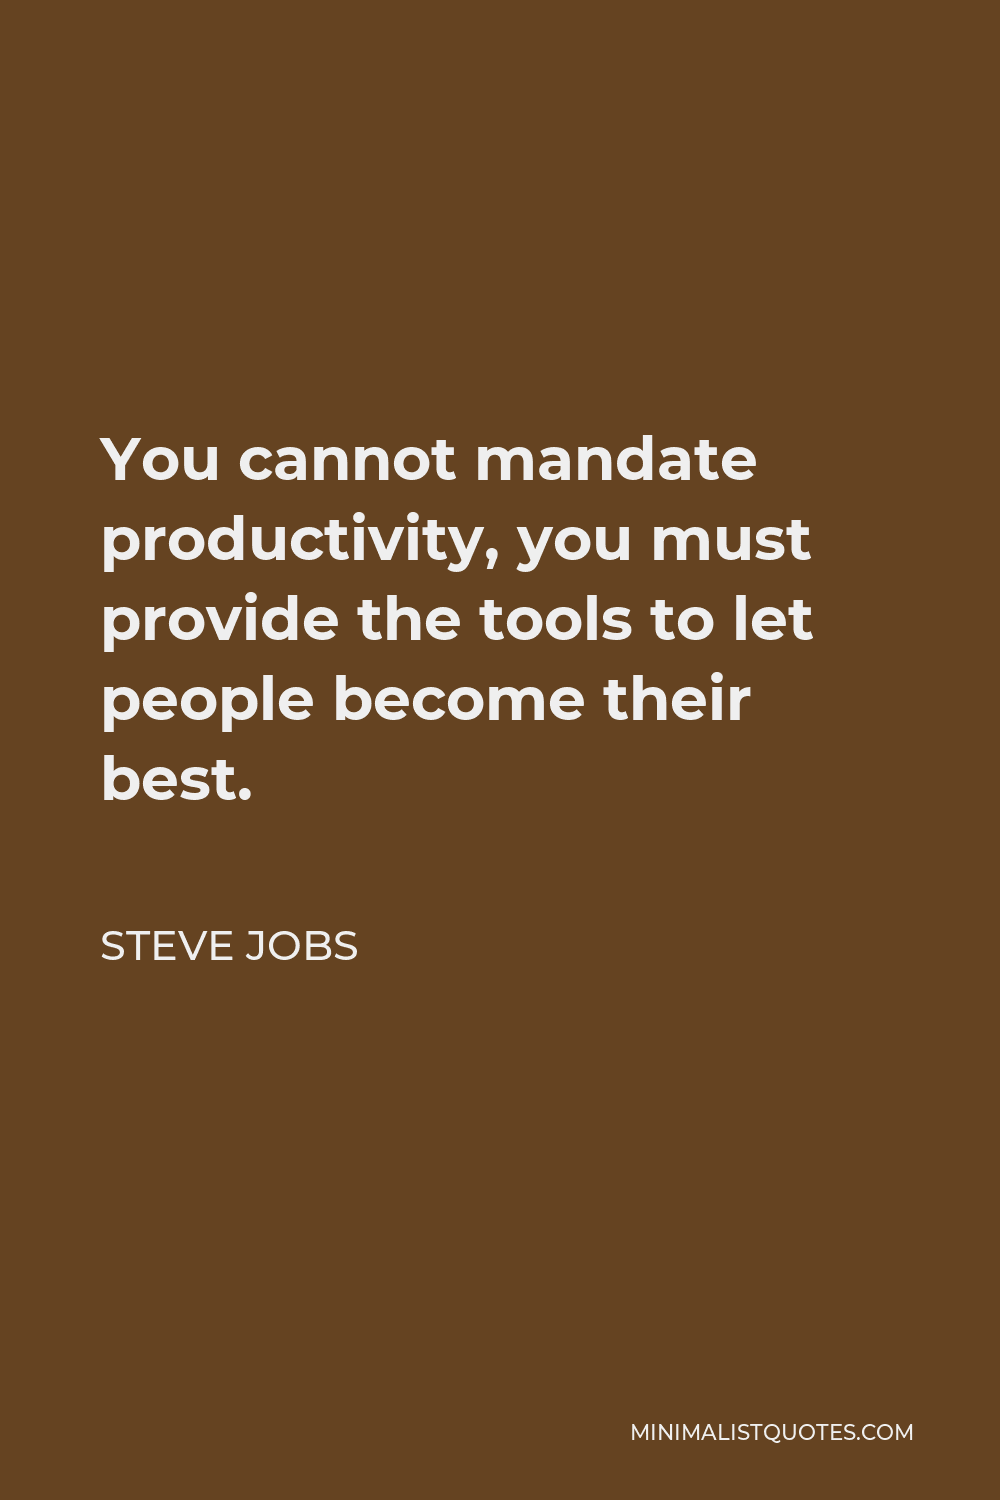 Steve Jobs Quote - You cannot mandate productivity, you must provide the tools to let people become their best.